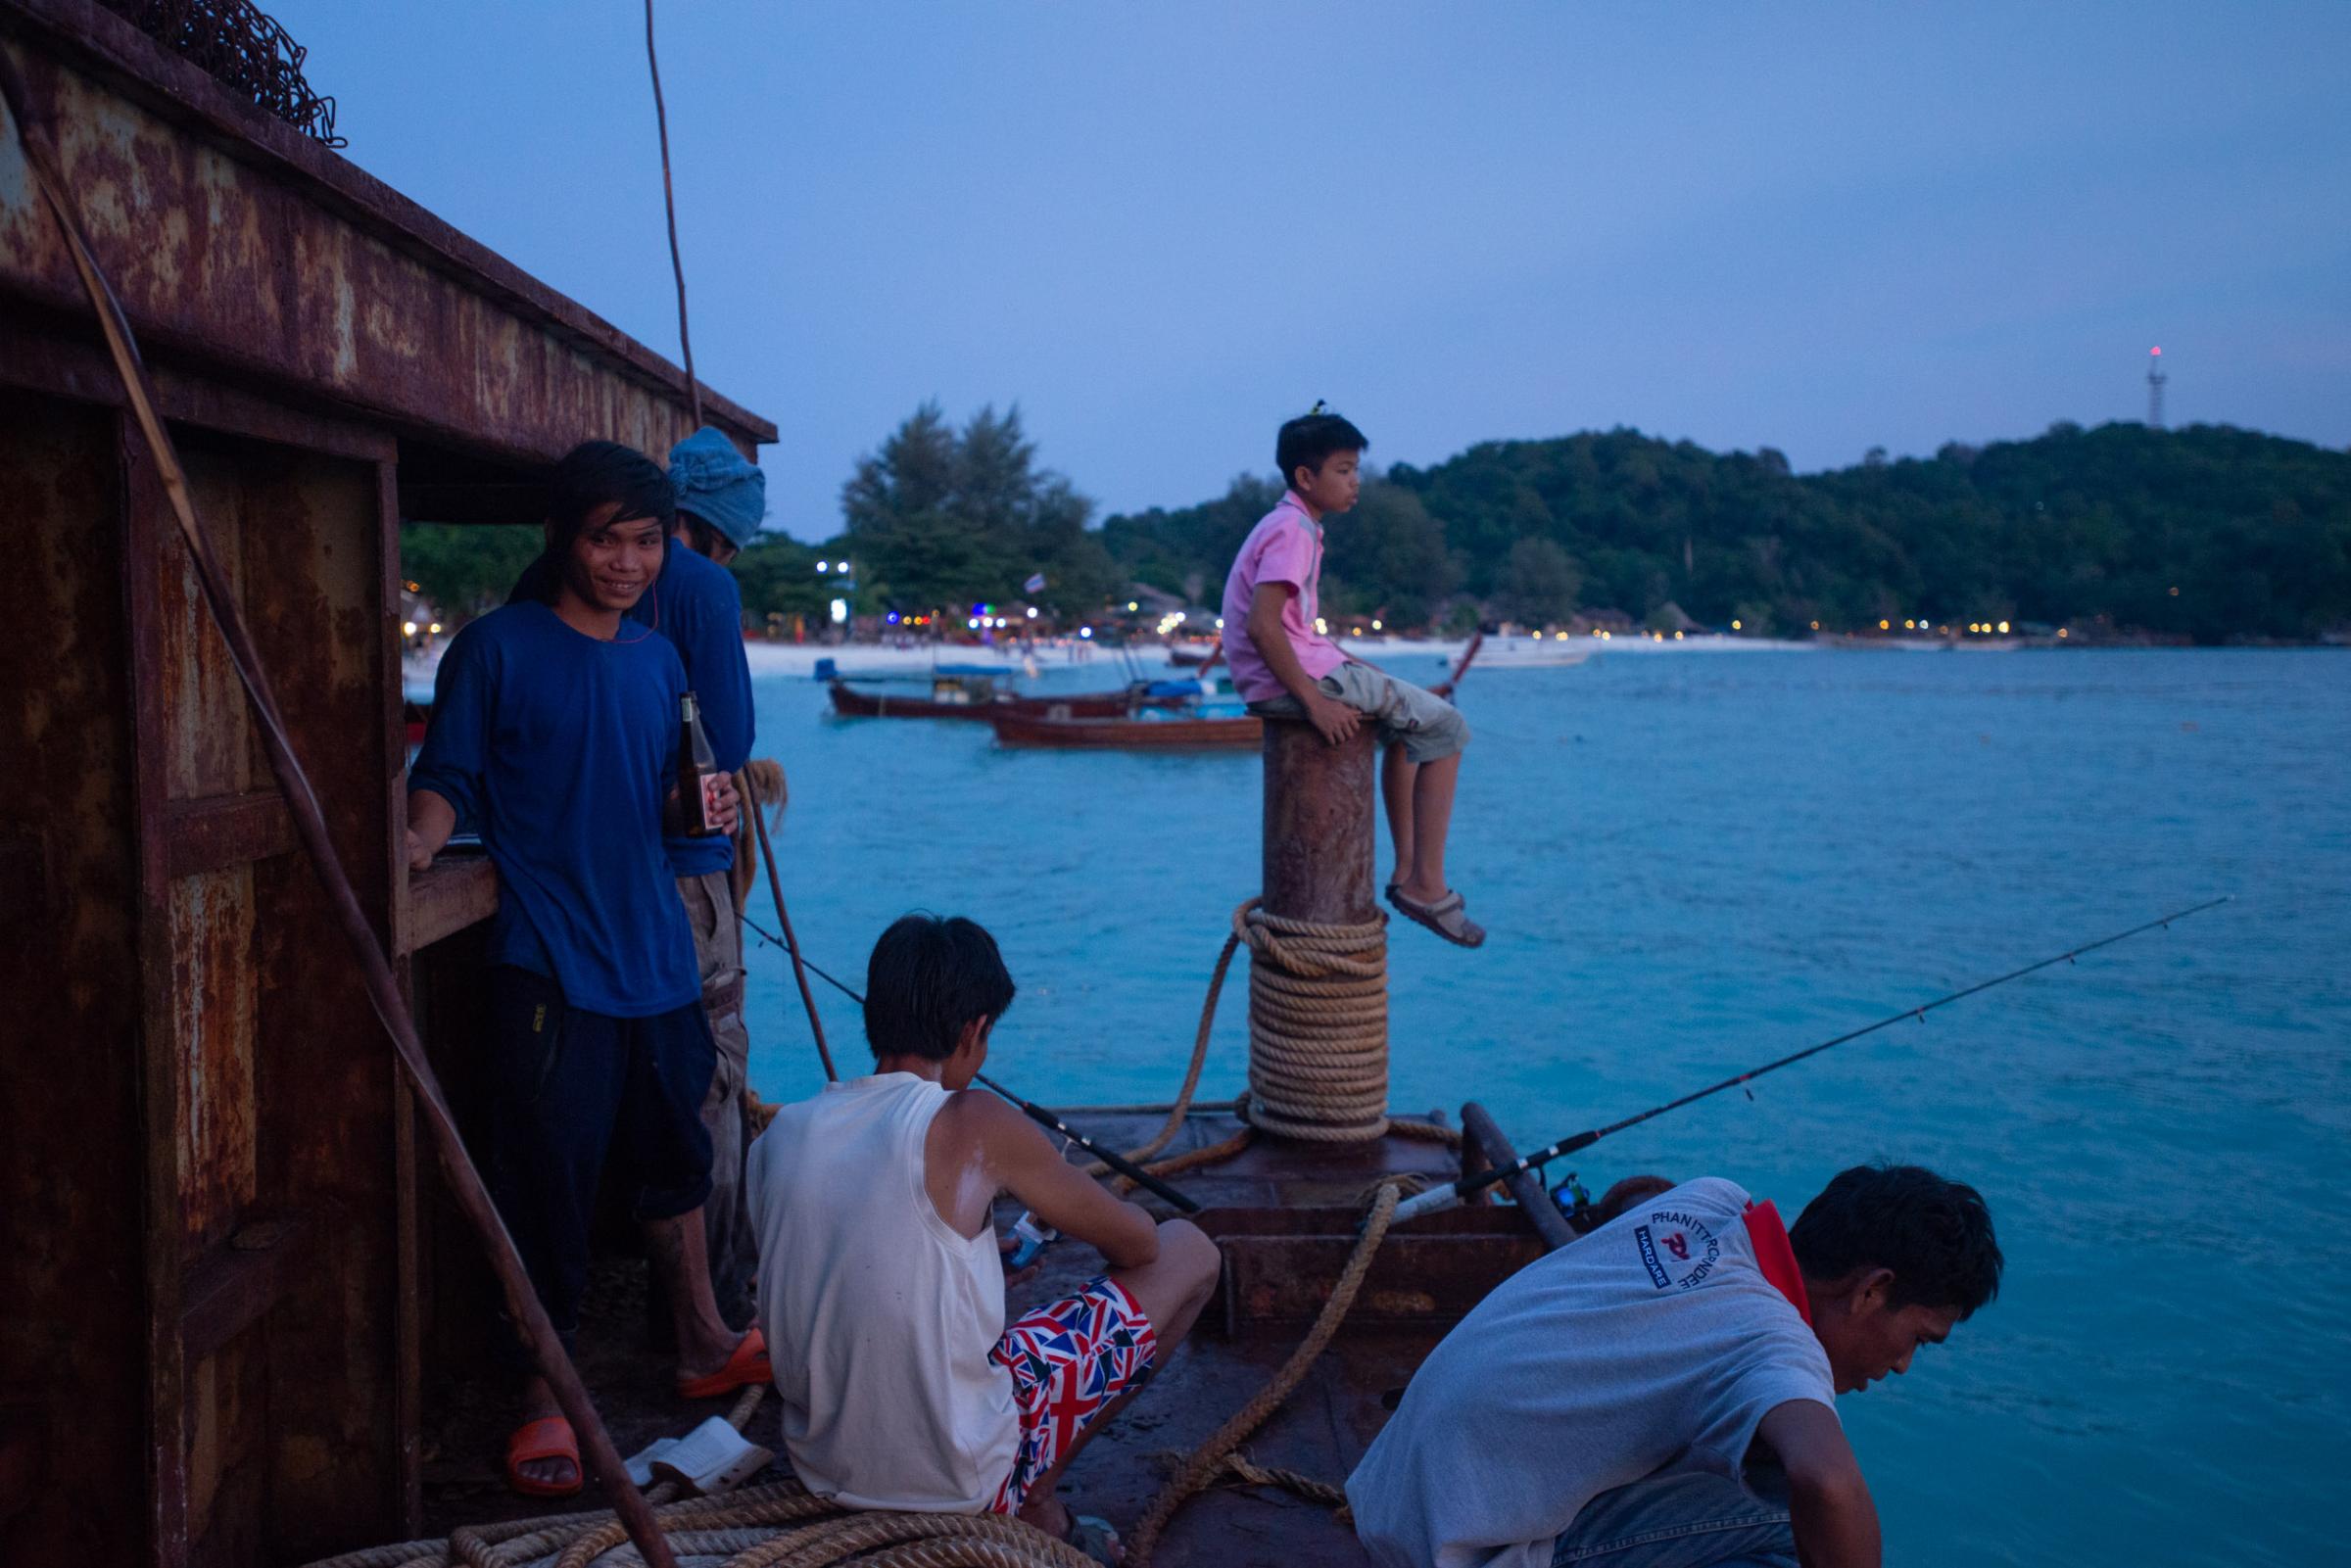 Lipe Island - Burmese construction workers fish at the end of the boat...